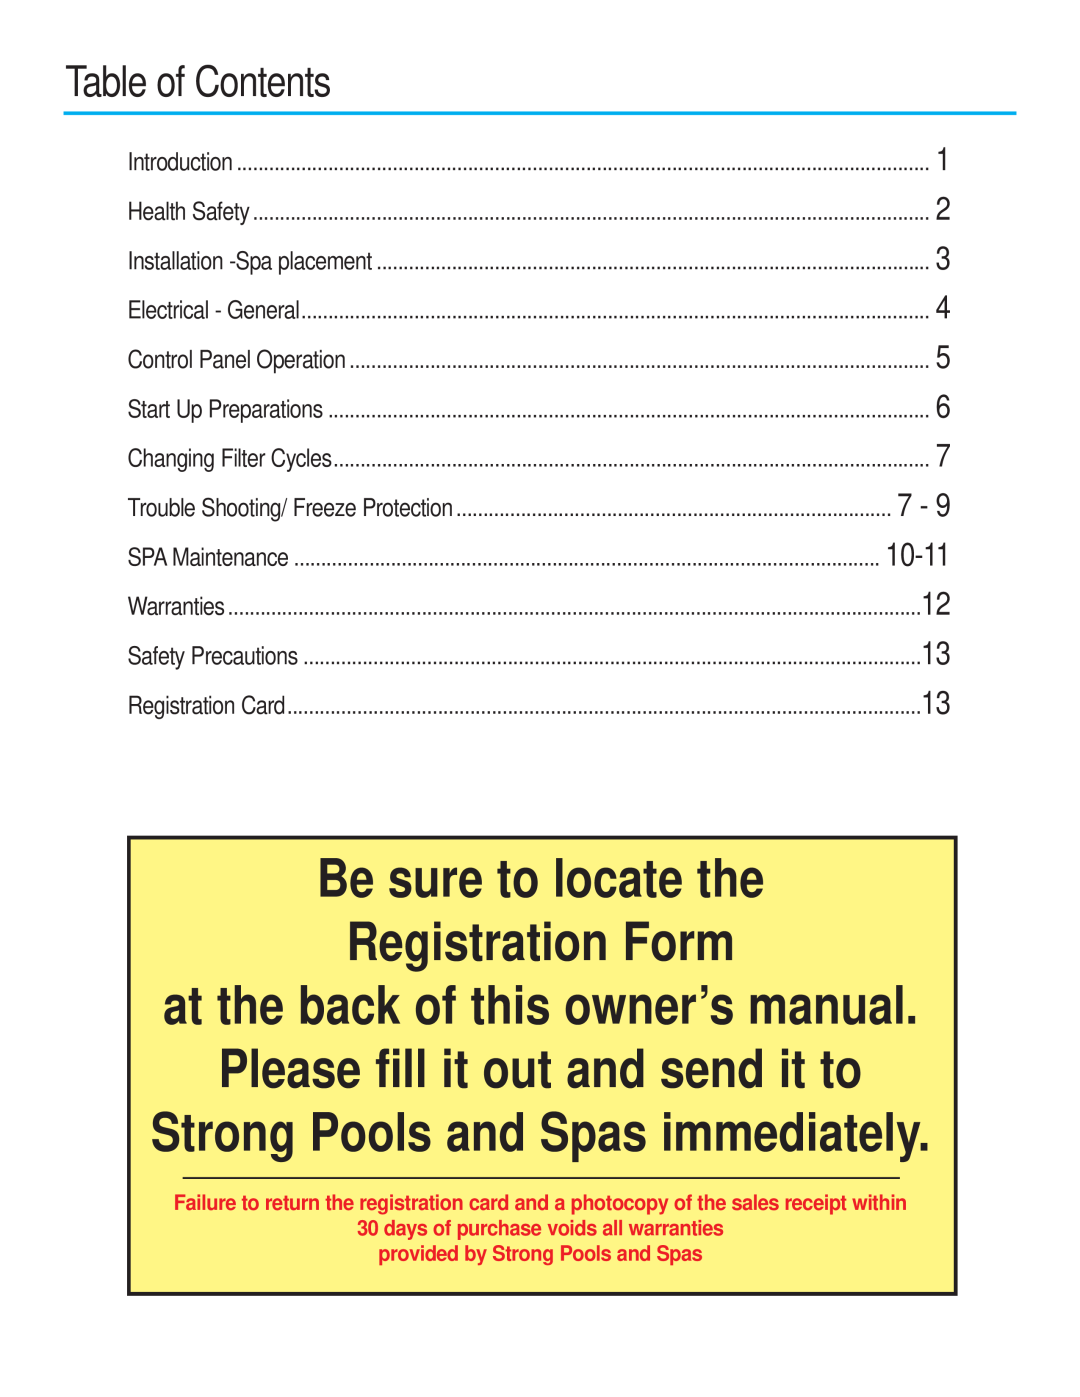 Strong Pools and Spas Freedom owner manual Table of Contents, Be sure to locate the Registration Form 